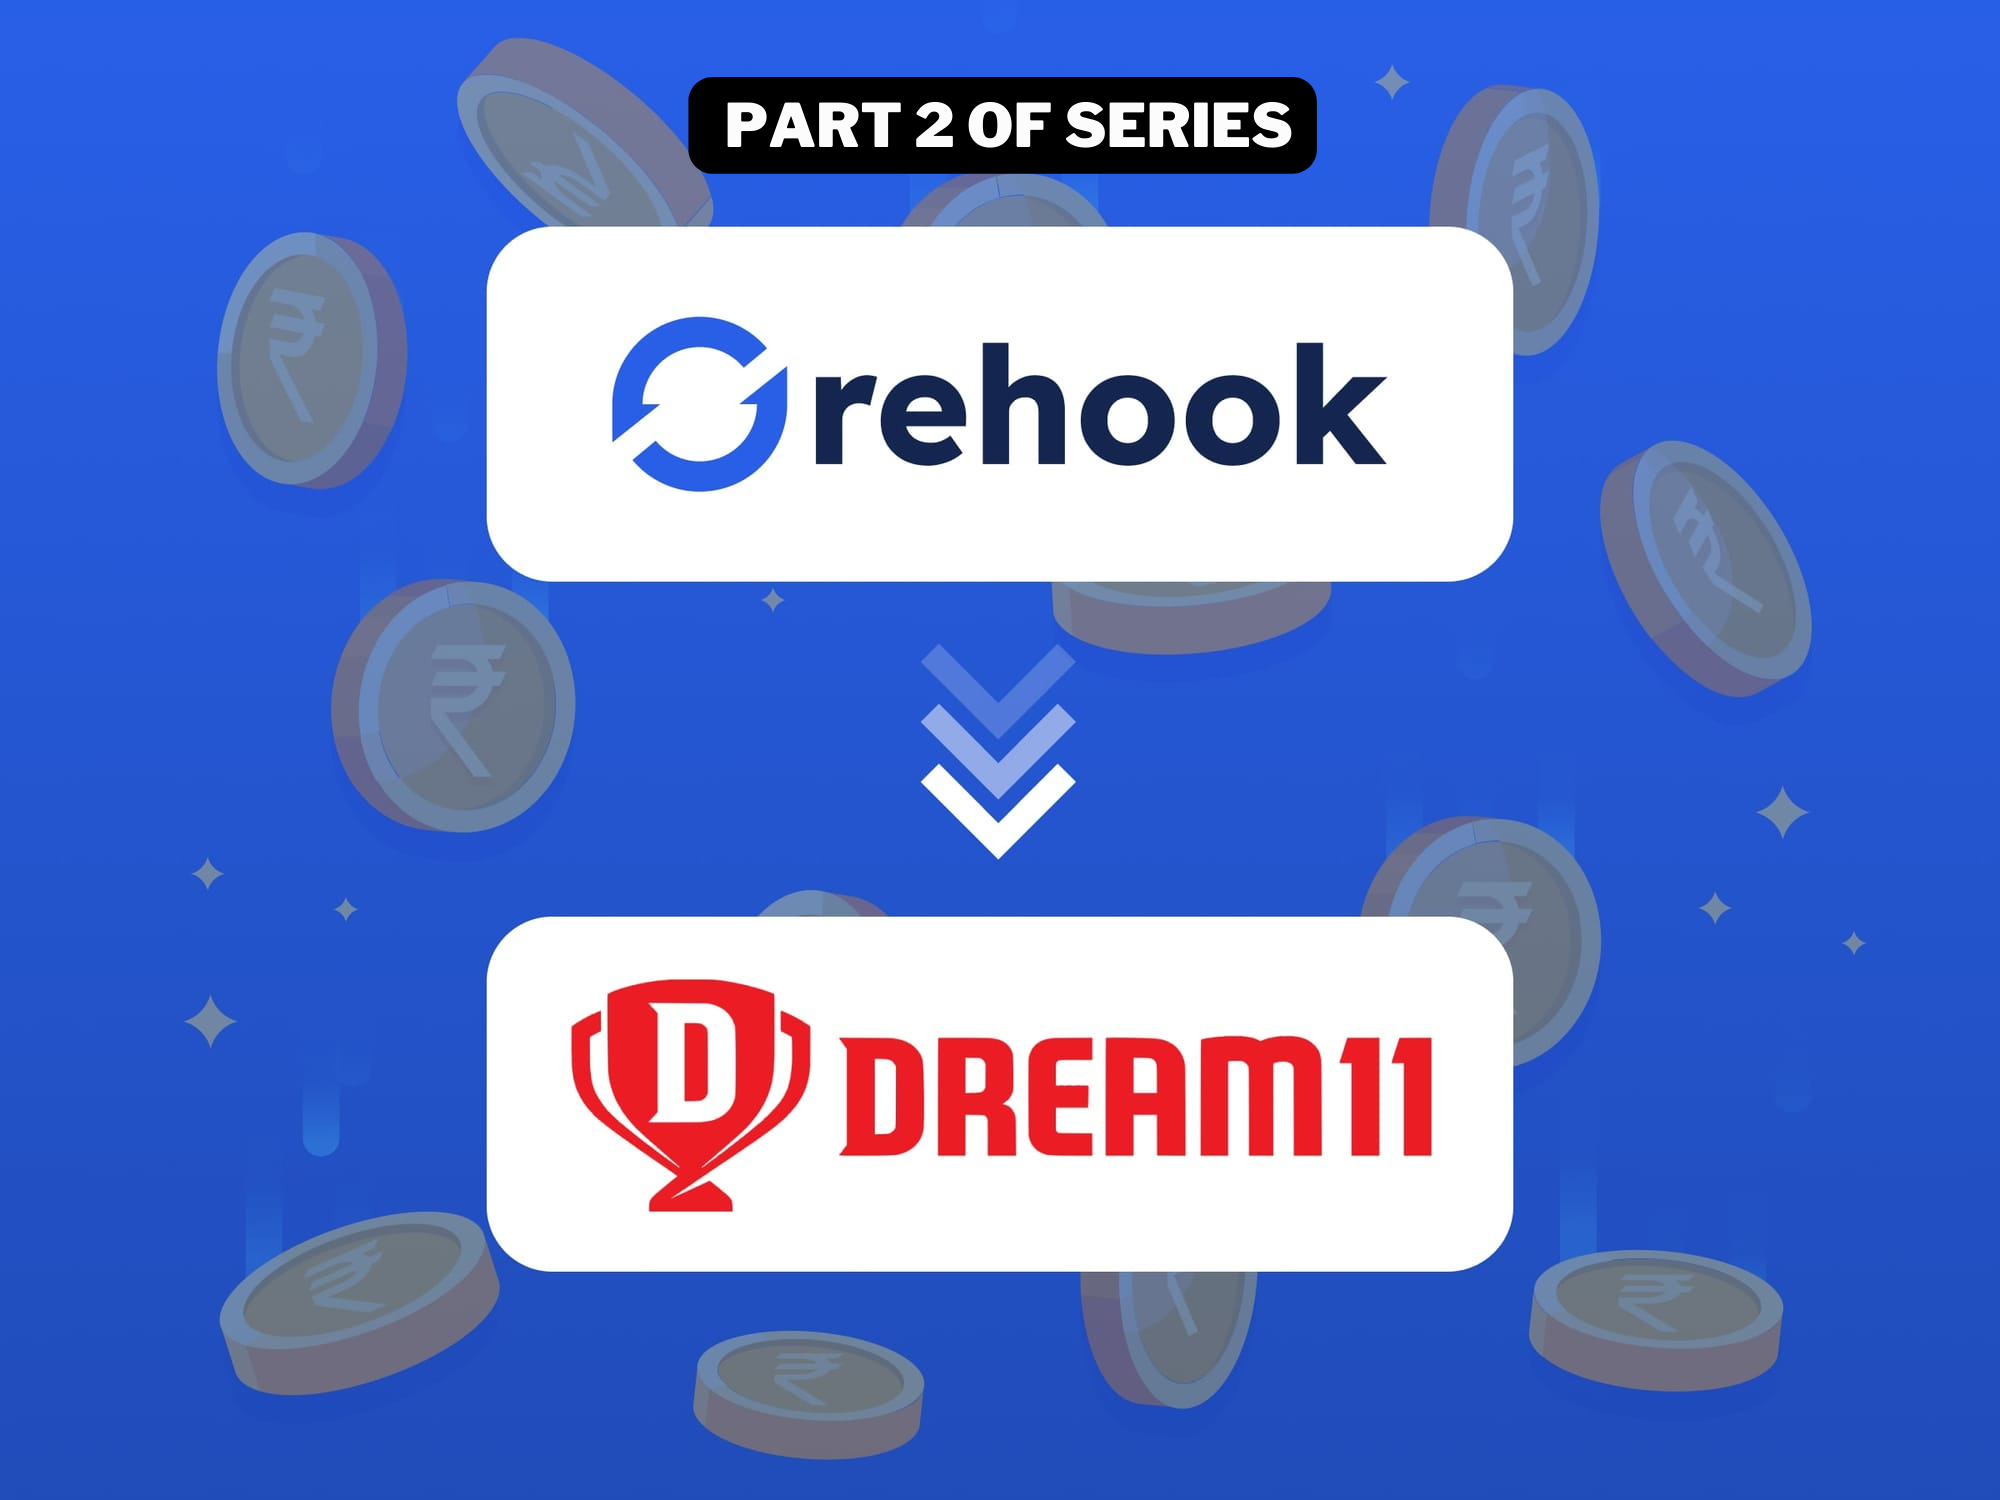 Part Two of Series: How to Create a Loyalty Points System Like Dream11's 'DreamCoins' Using rehook.ai